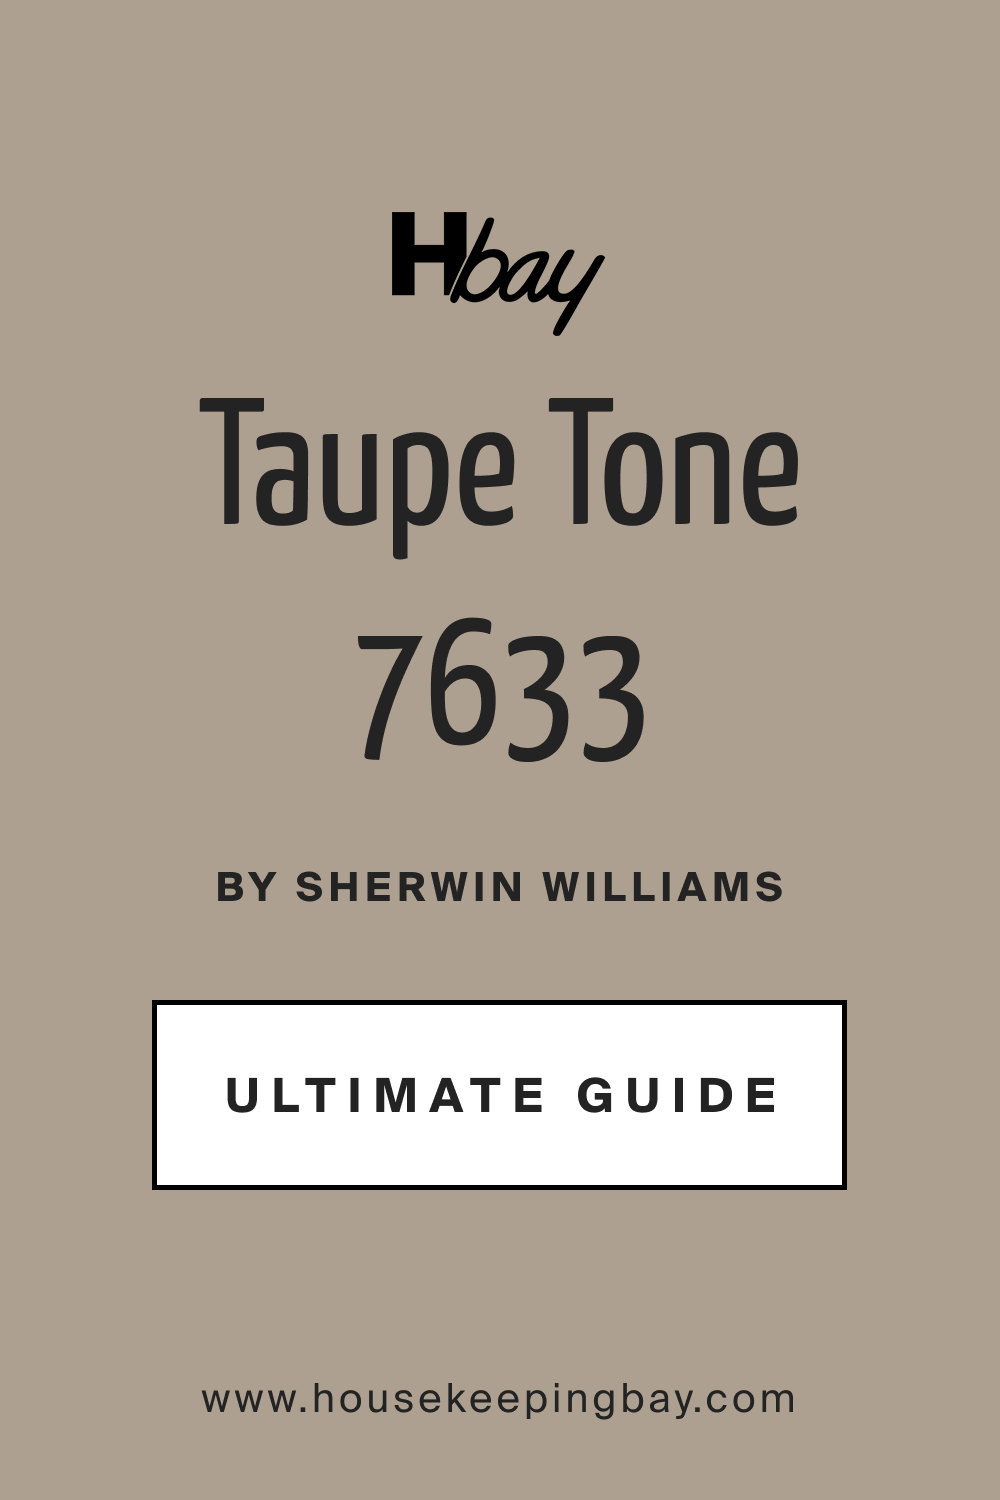 Taupe Tone SW 7633 by Sherwin Williams Ultimate Guide